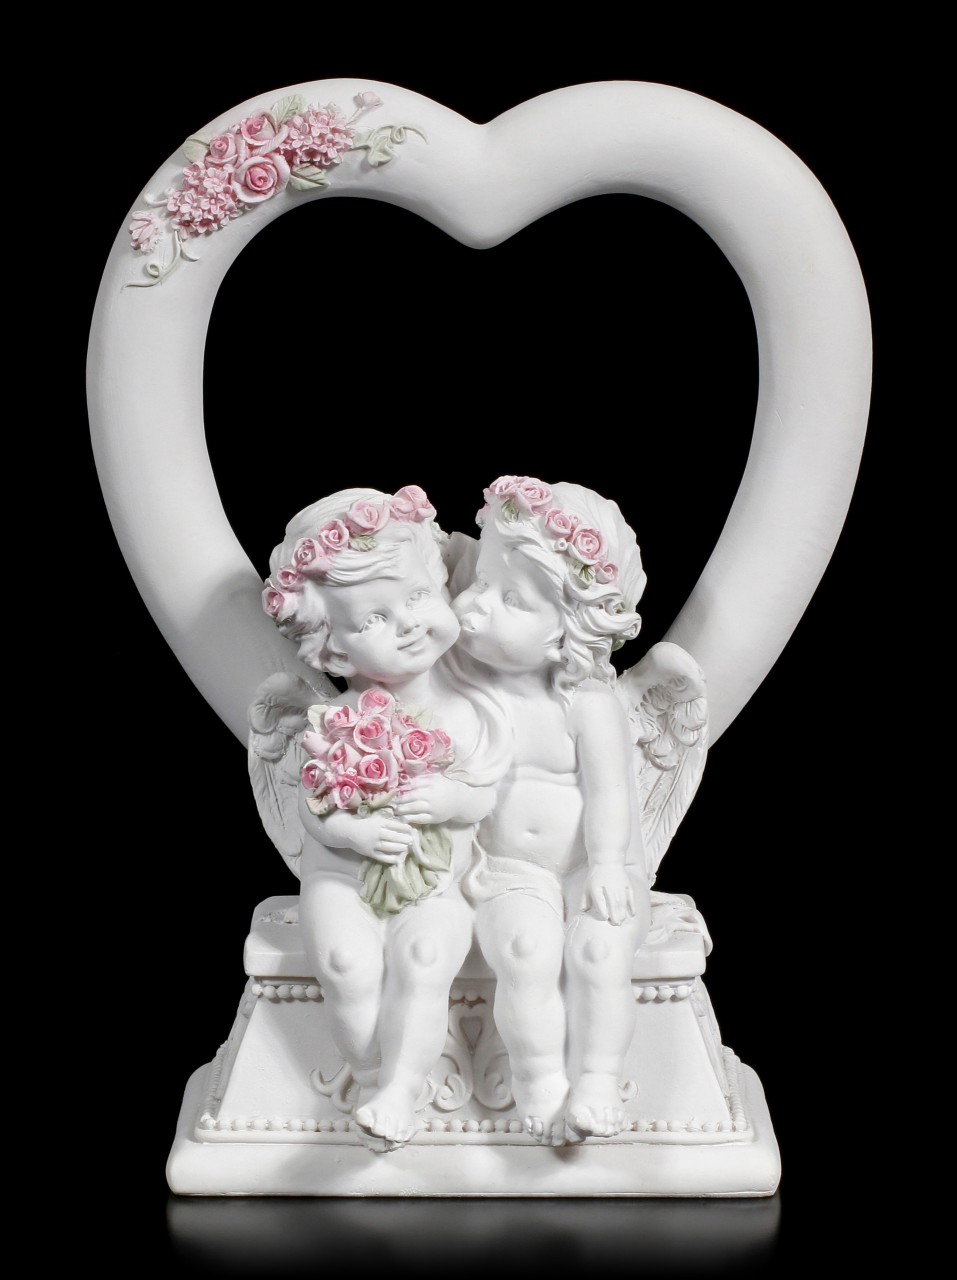 Two white Cherubim Figurines in front of a Heart